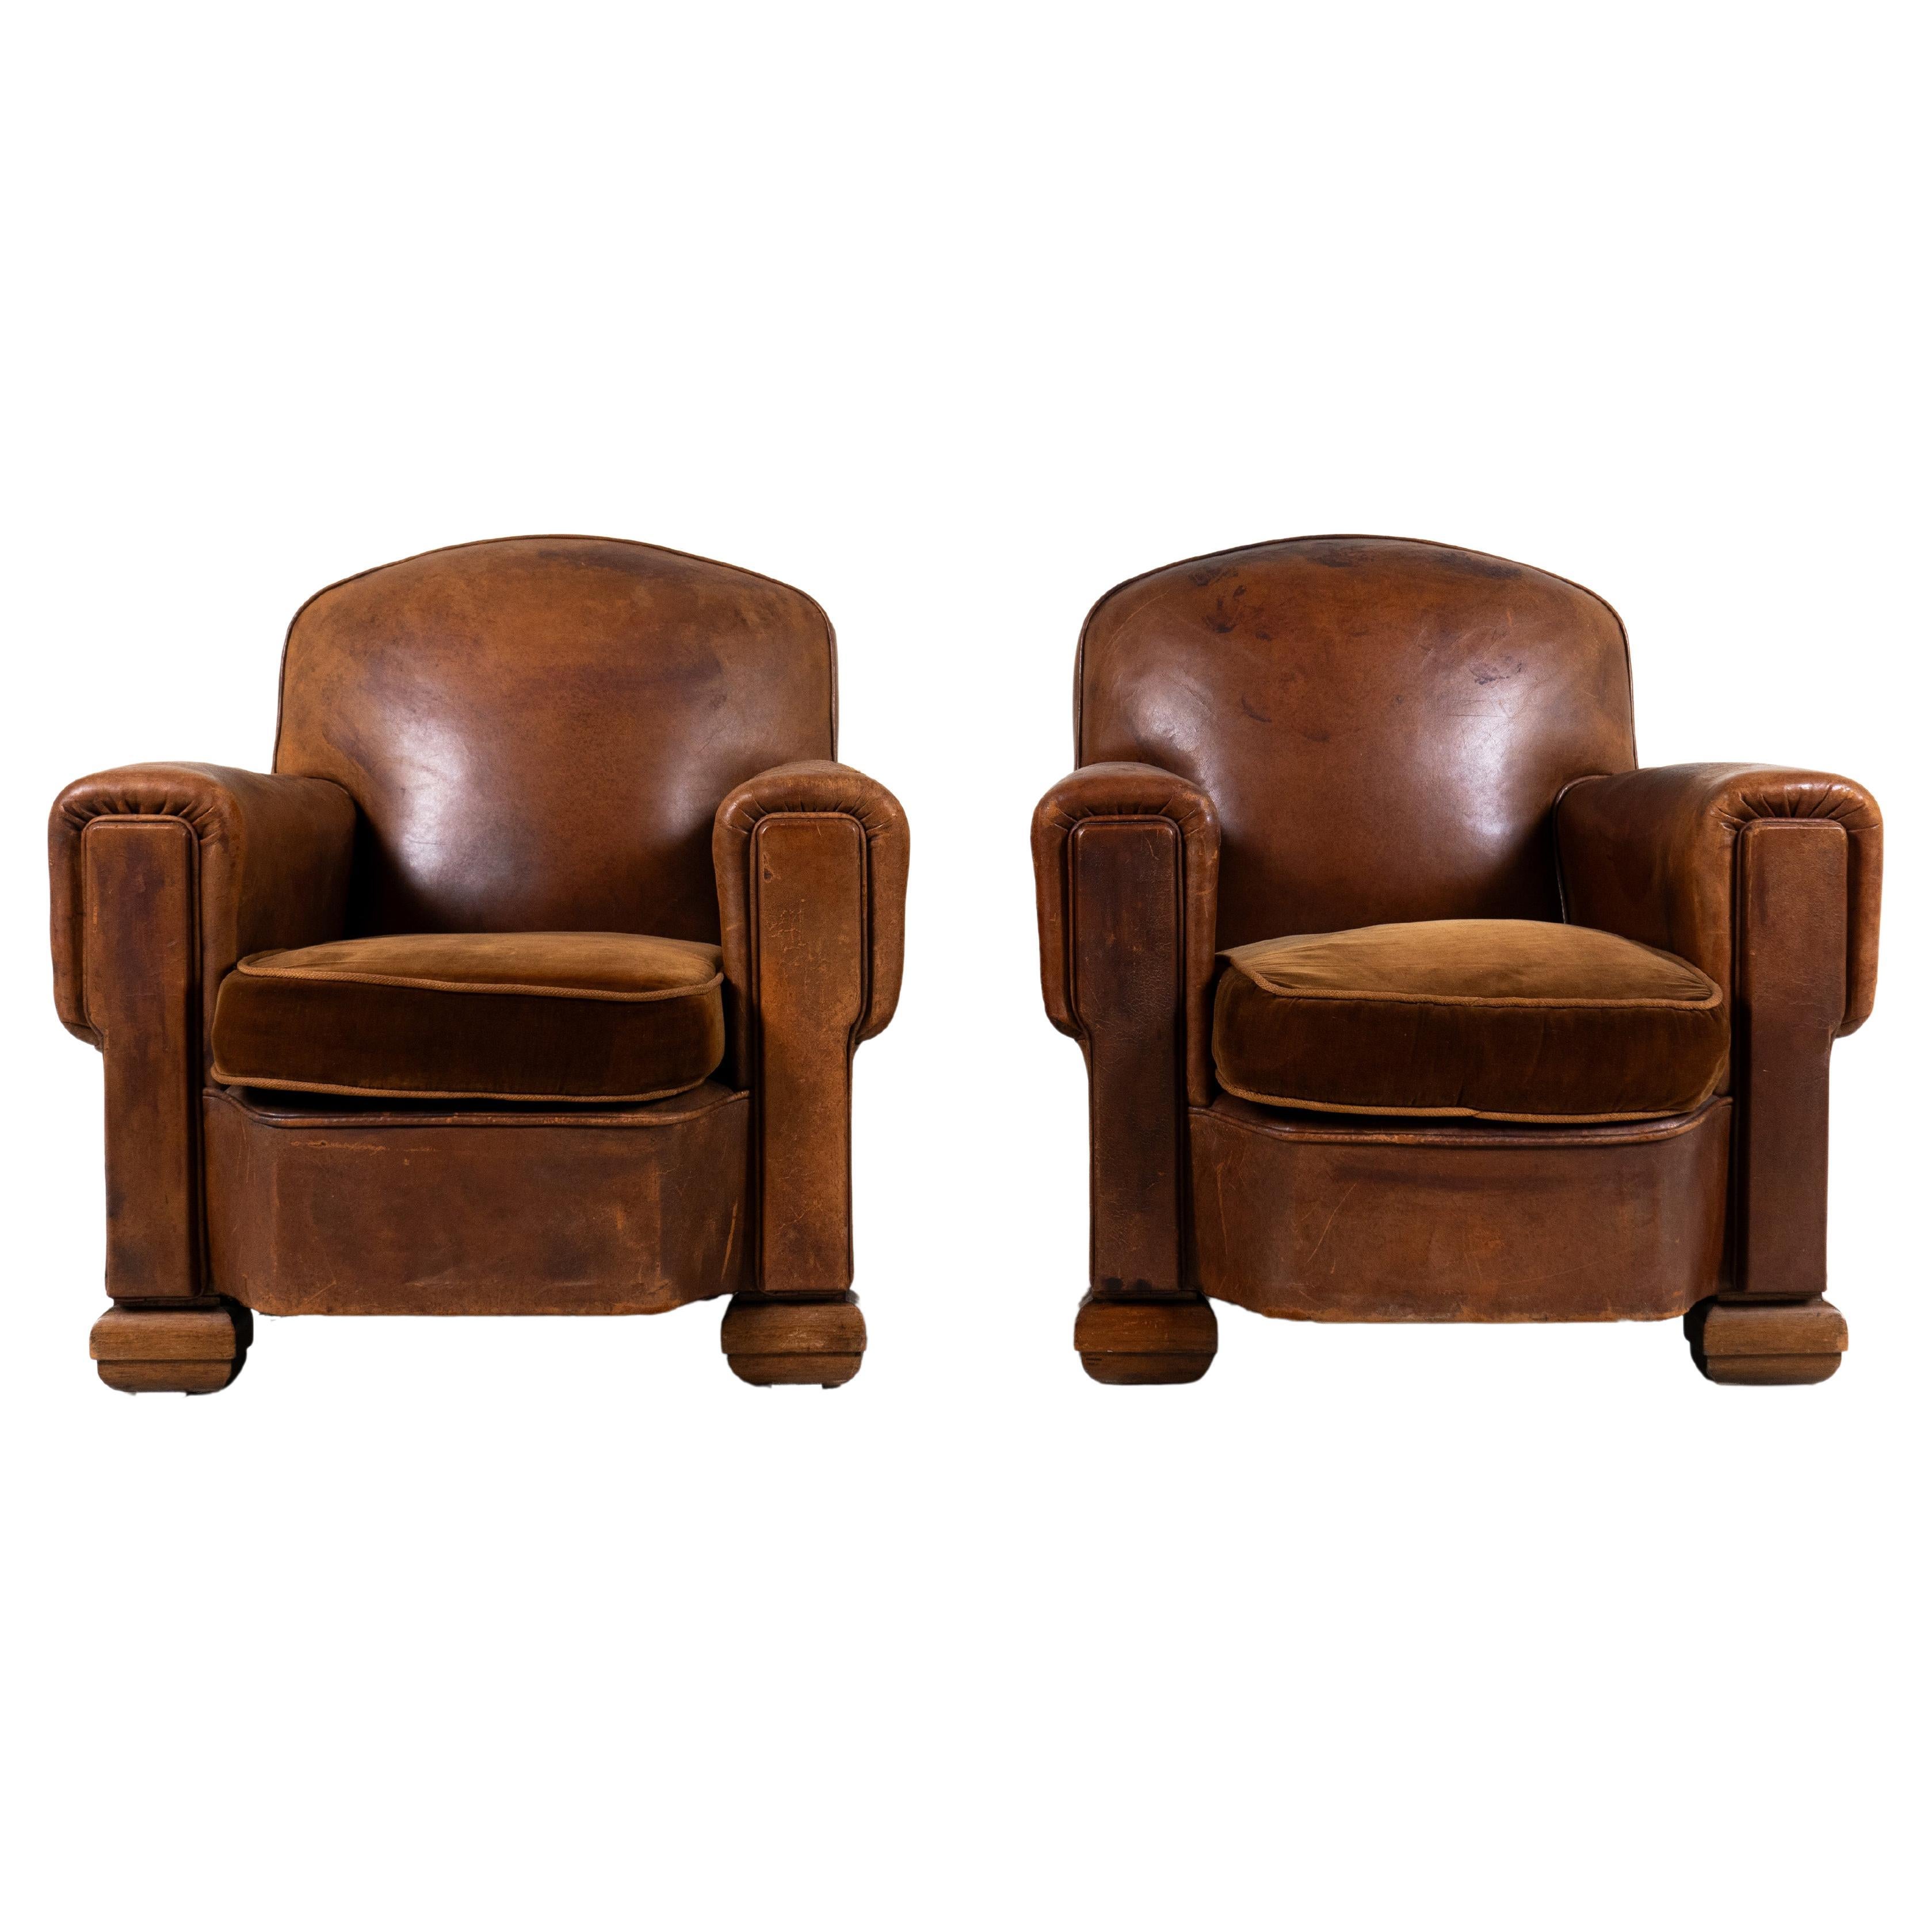 A Pair of Vintage Leather Club Chairs, France c.1950 For Sale